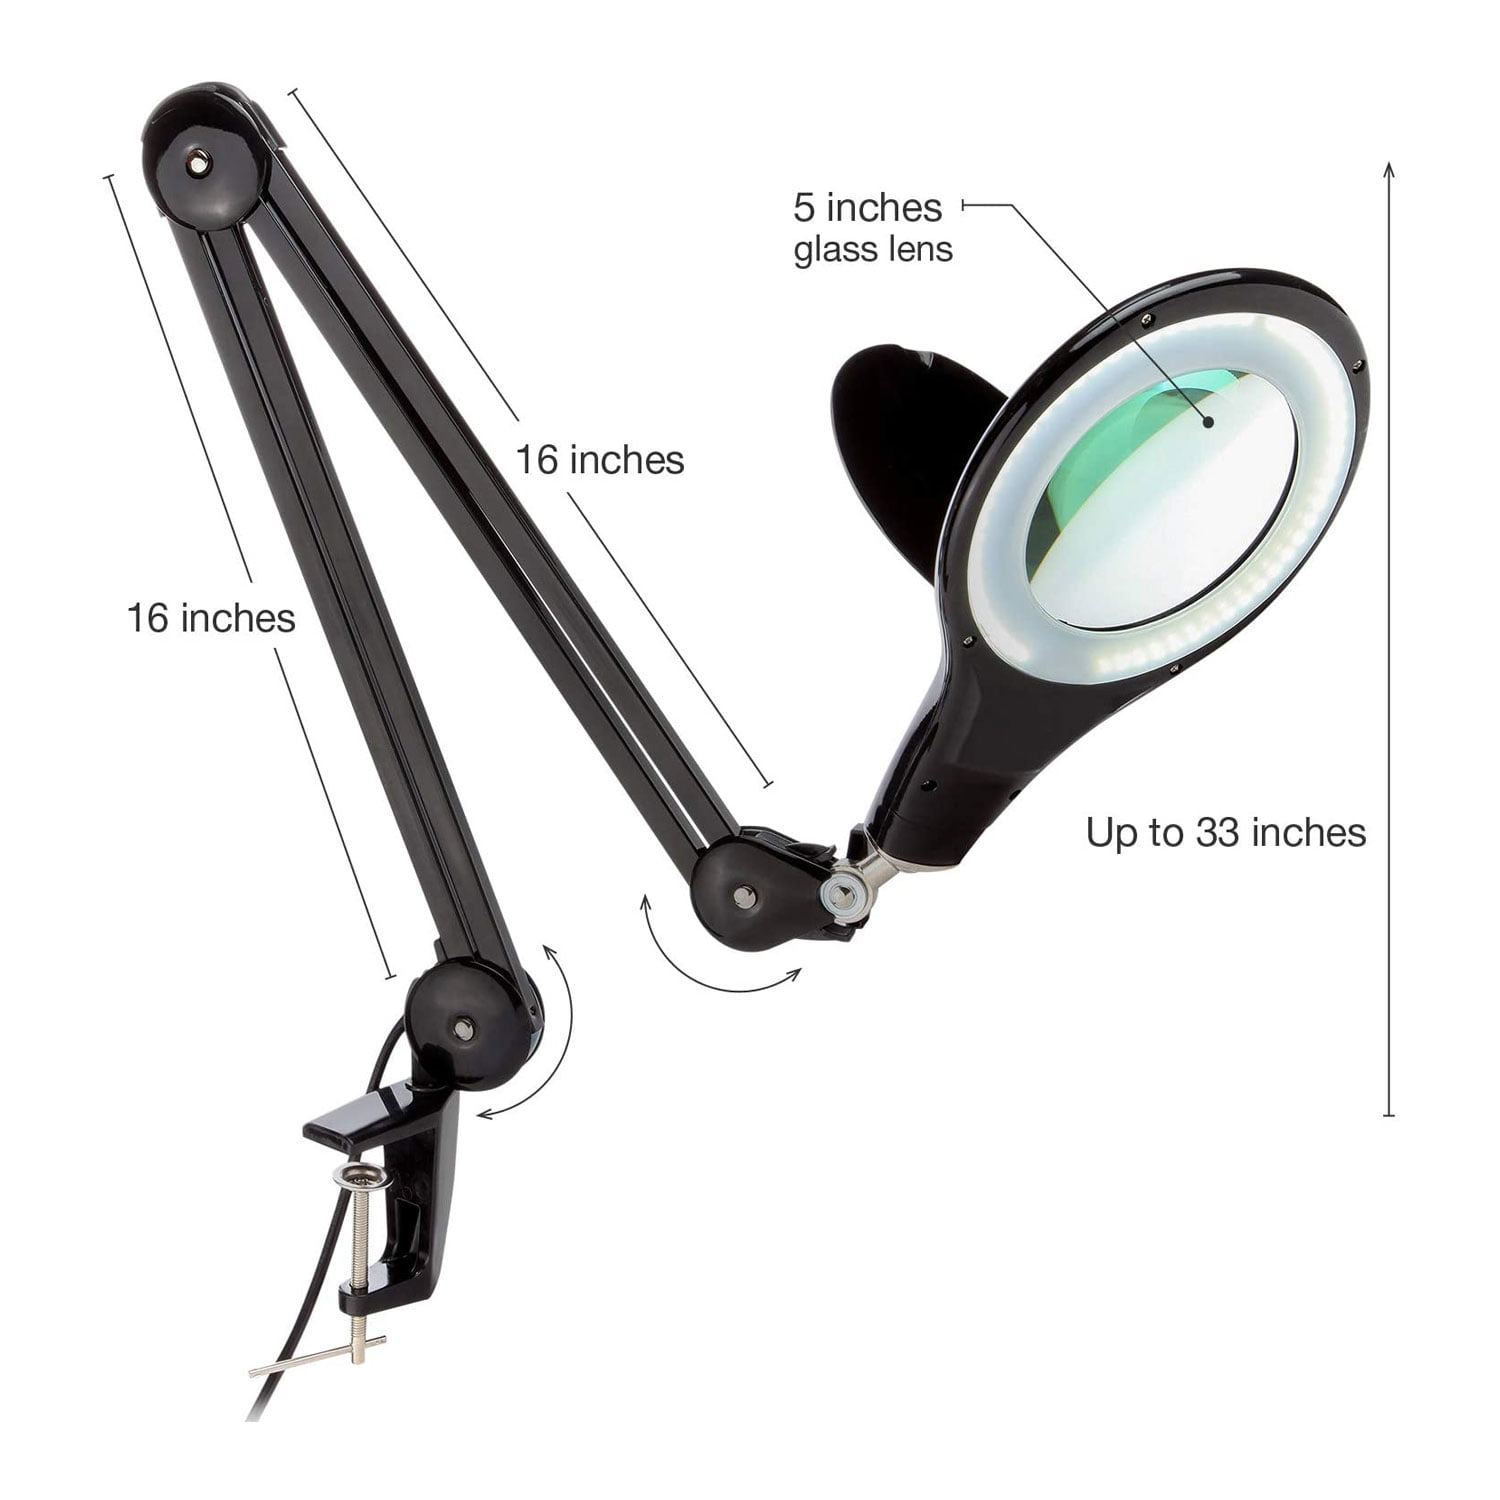 Brightech Lightview Pro Led Magnifying, Lighted Magnifying Lamp With Clamp